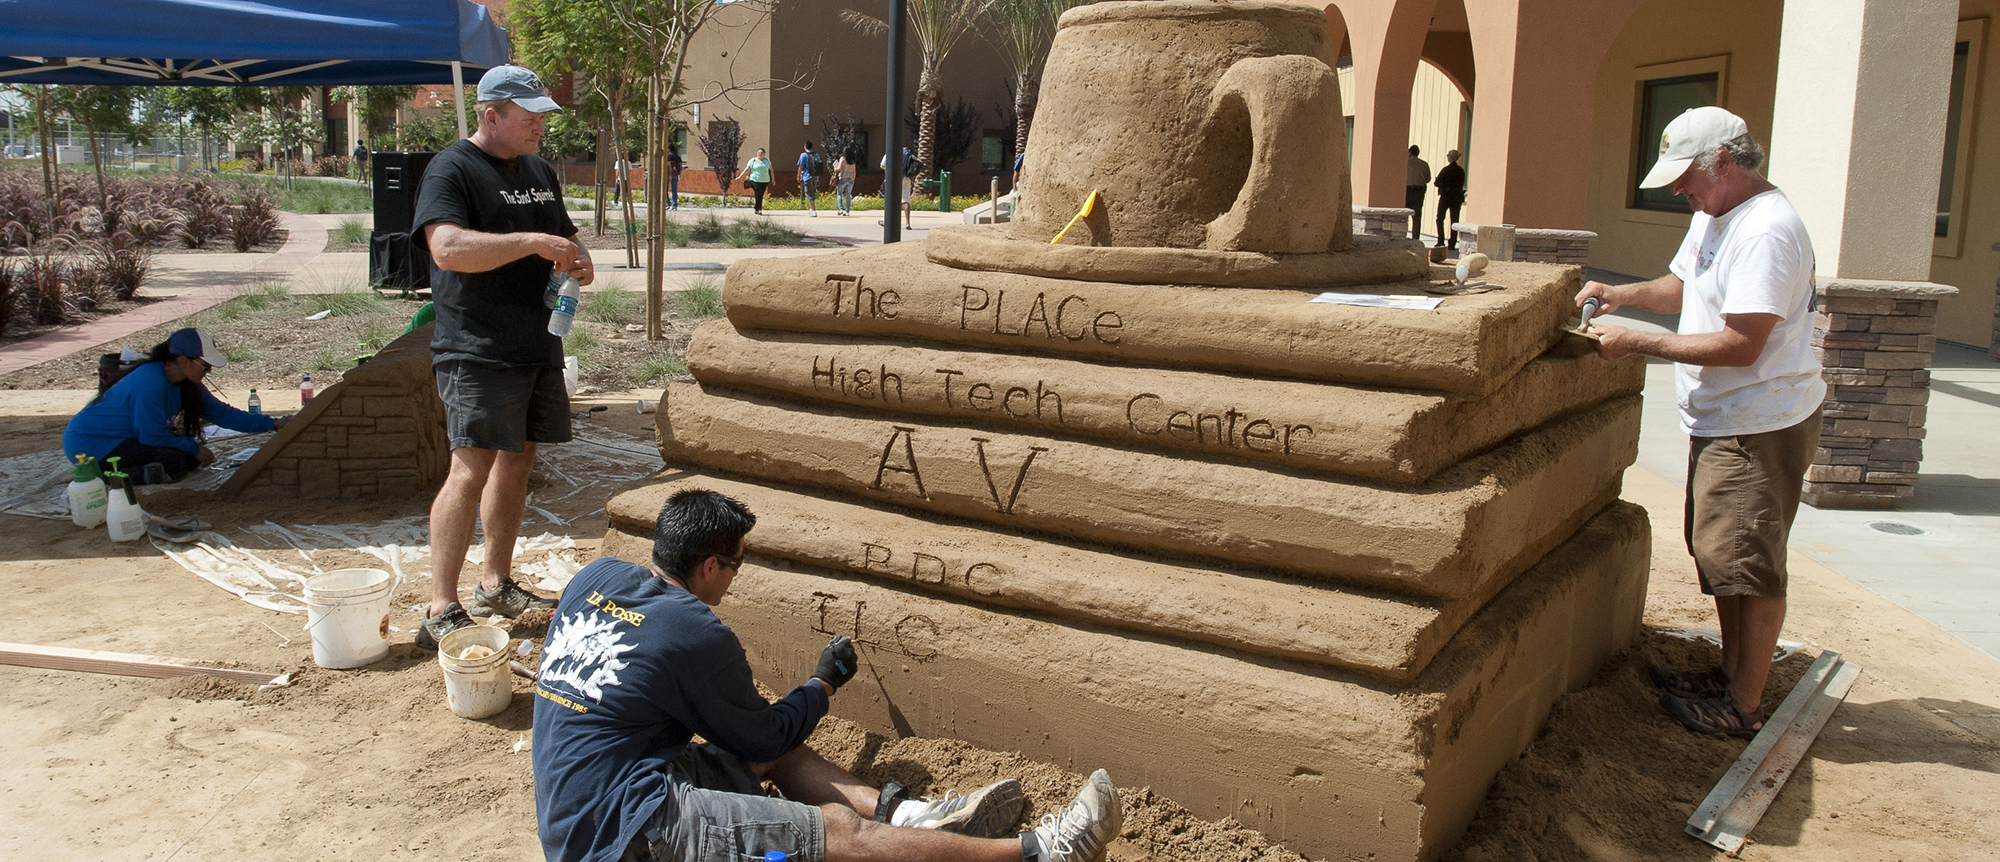 A sand sculpture of a stack of books was constructed for the grand opening of the Miramar Library and Learning Resource Center